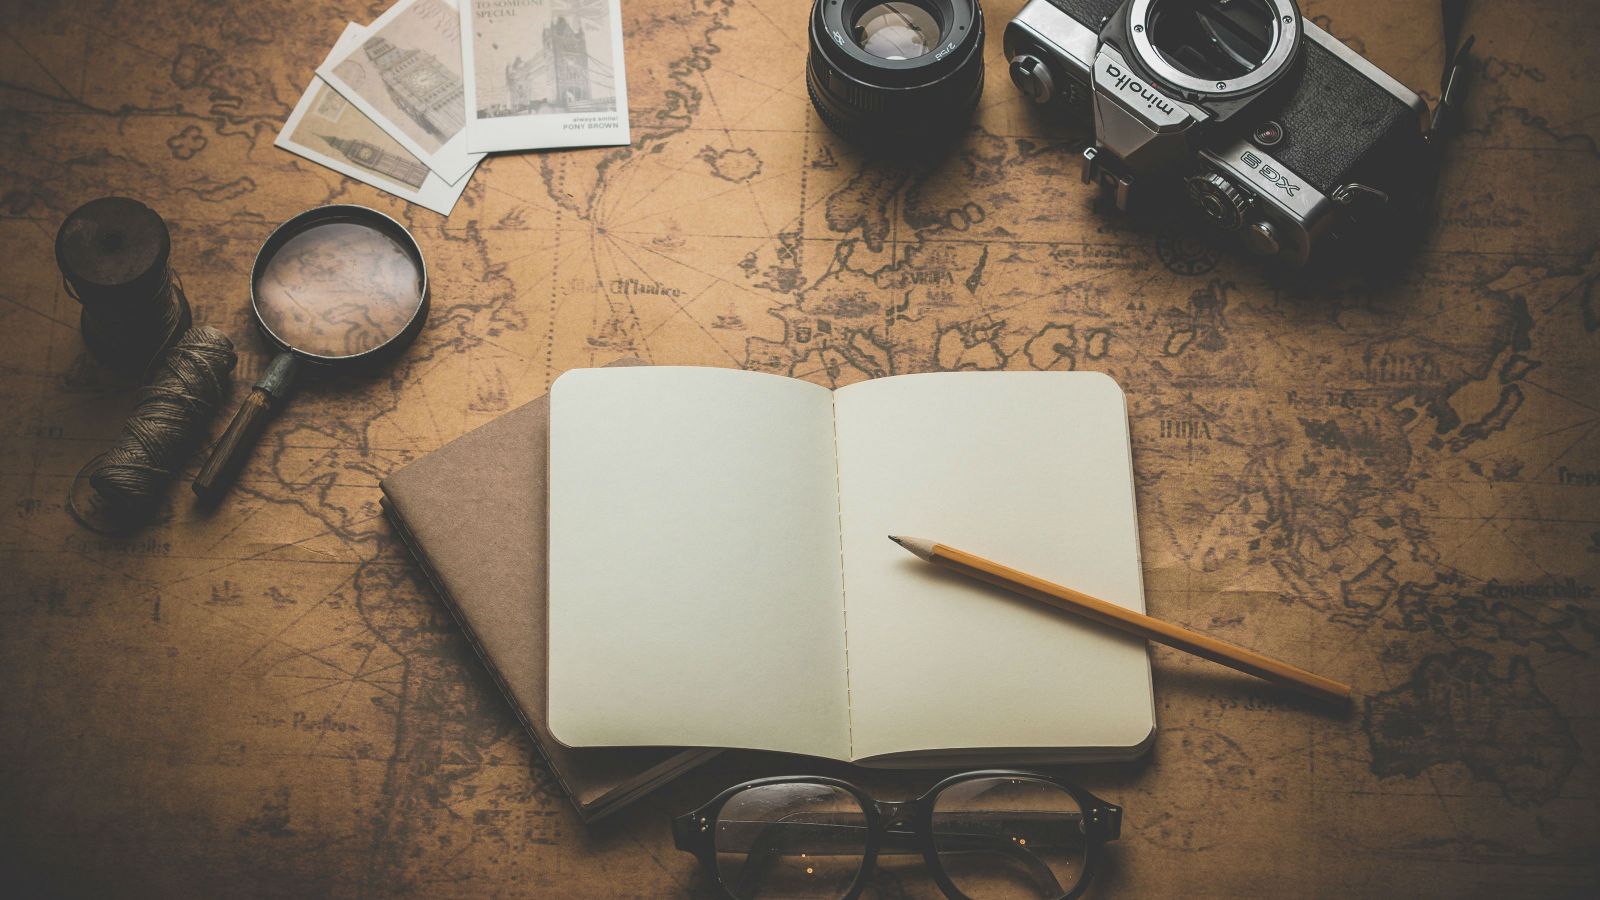 A notebook, pencil, magnifying glass, spectacles, camera and polaroids on a background of an old school world map.